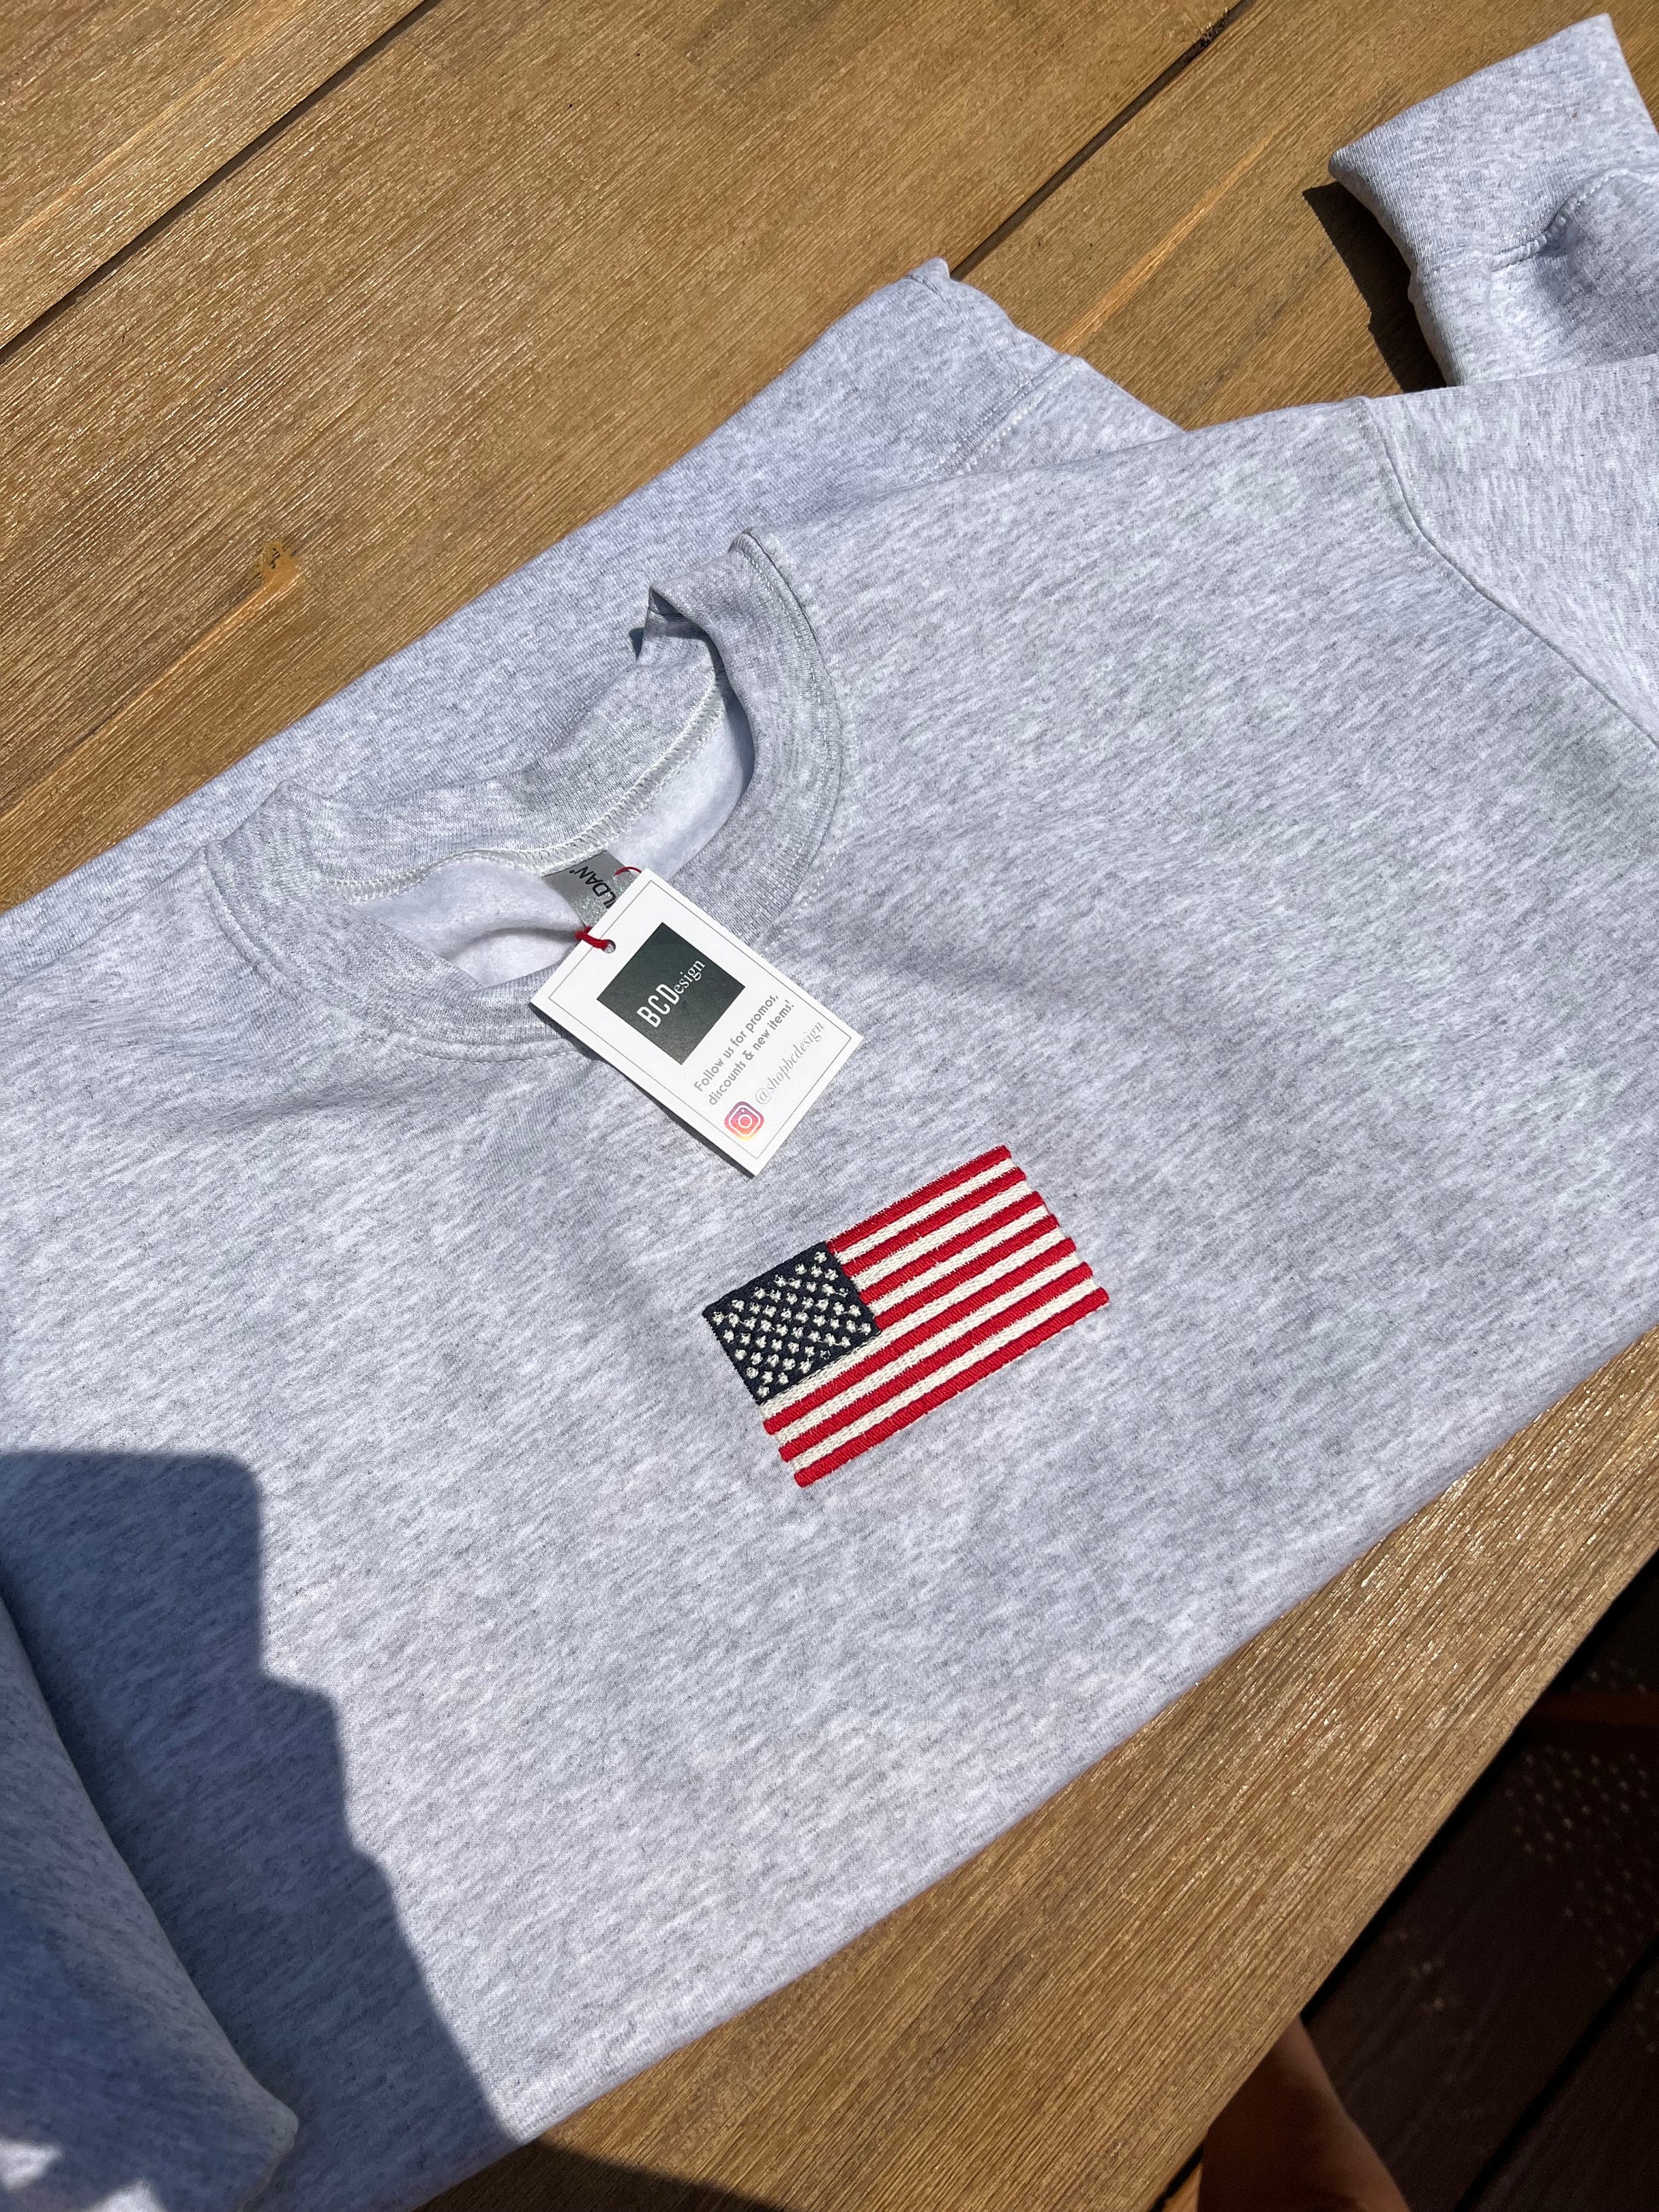 Flag Sweatshirt Comfort Colors Gifts For Her Embroidered Shirt Crewneck 4th of July Shirt